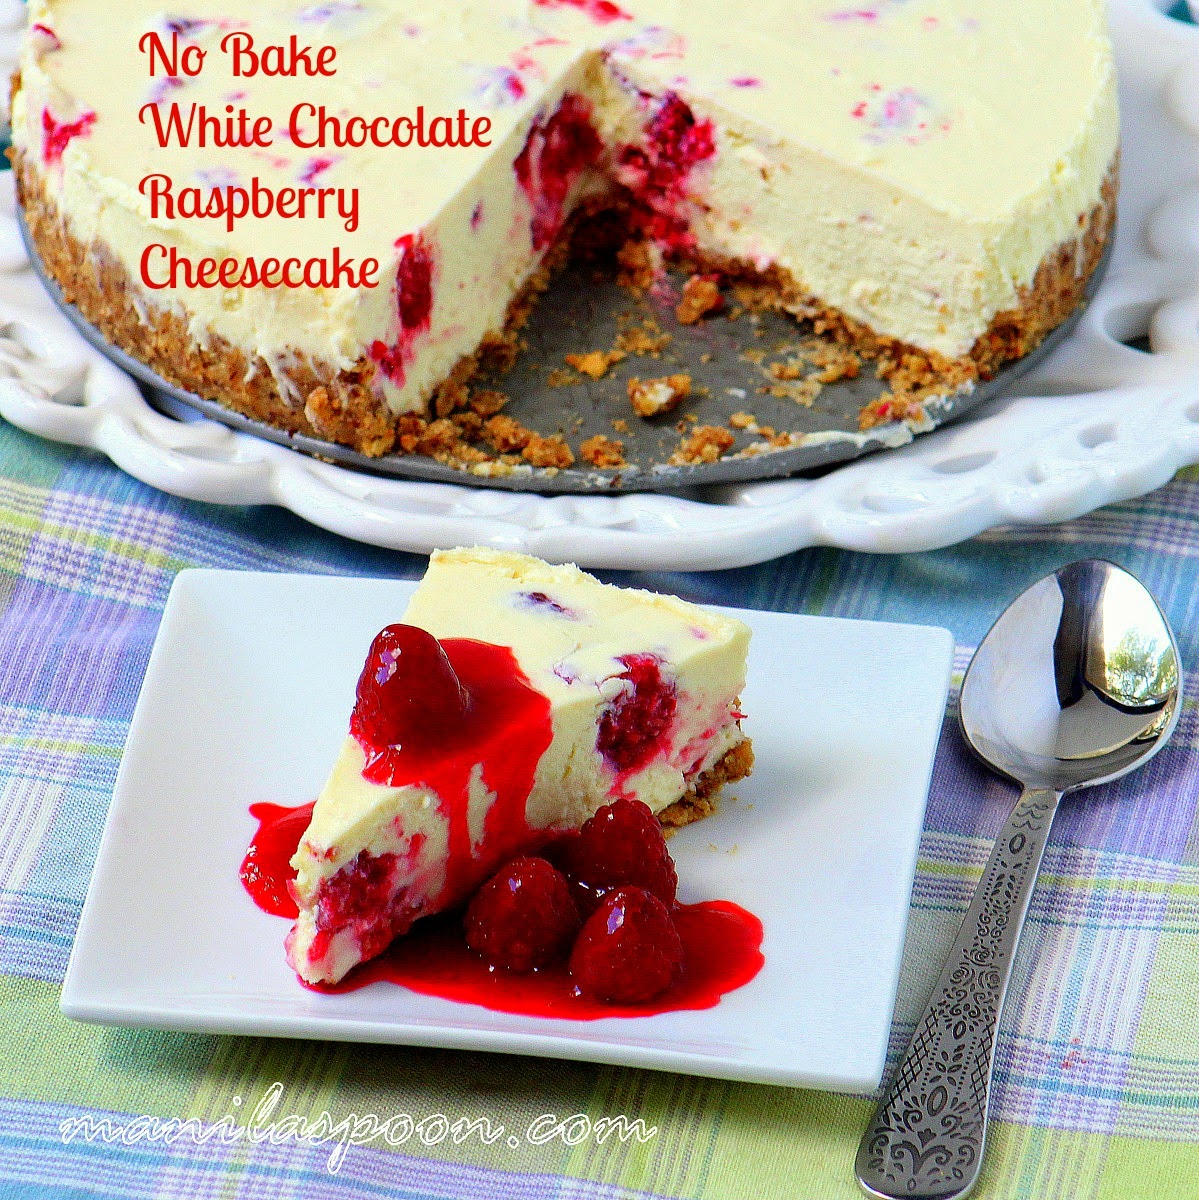 This luscious NO BAKE White Chocolate Raspberry Cheesecake is the ultimate summer dessert. Fresh and sweet-tangy raspberry coulis perfectly complements the rich and creamy cheesecake. Tried and tested, super easy recipe, too!